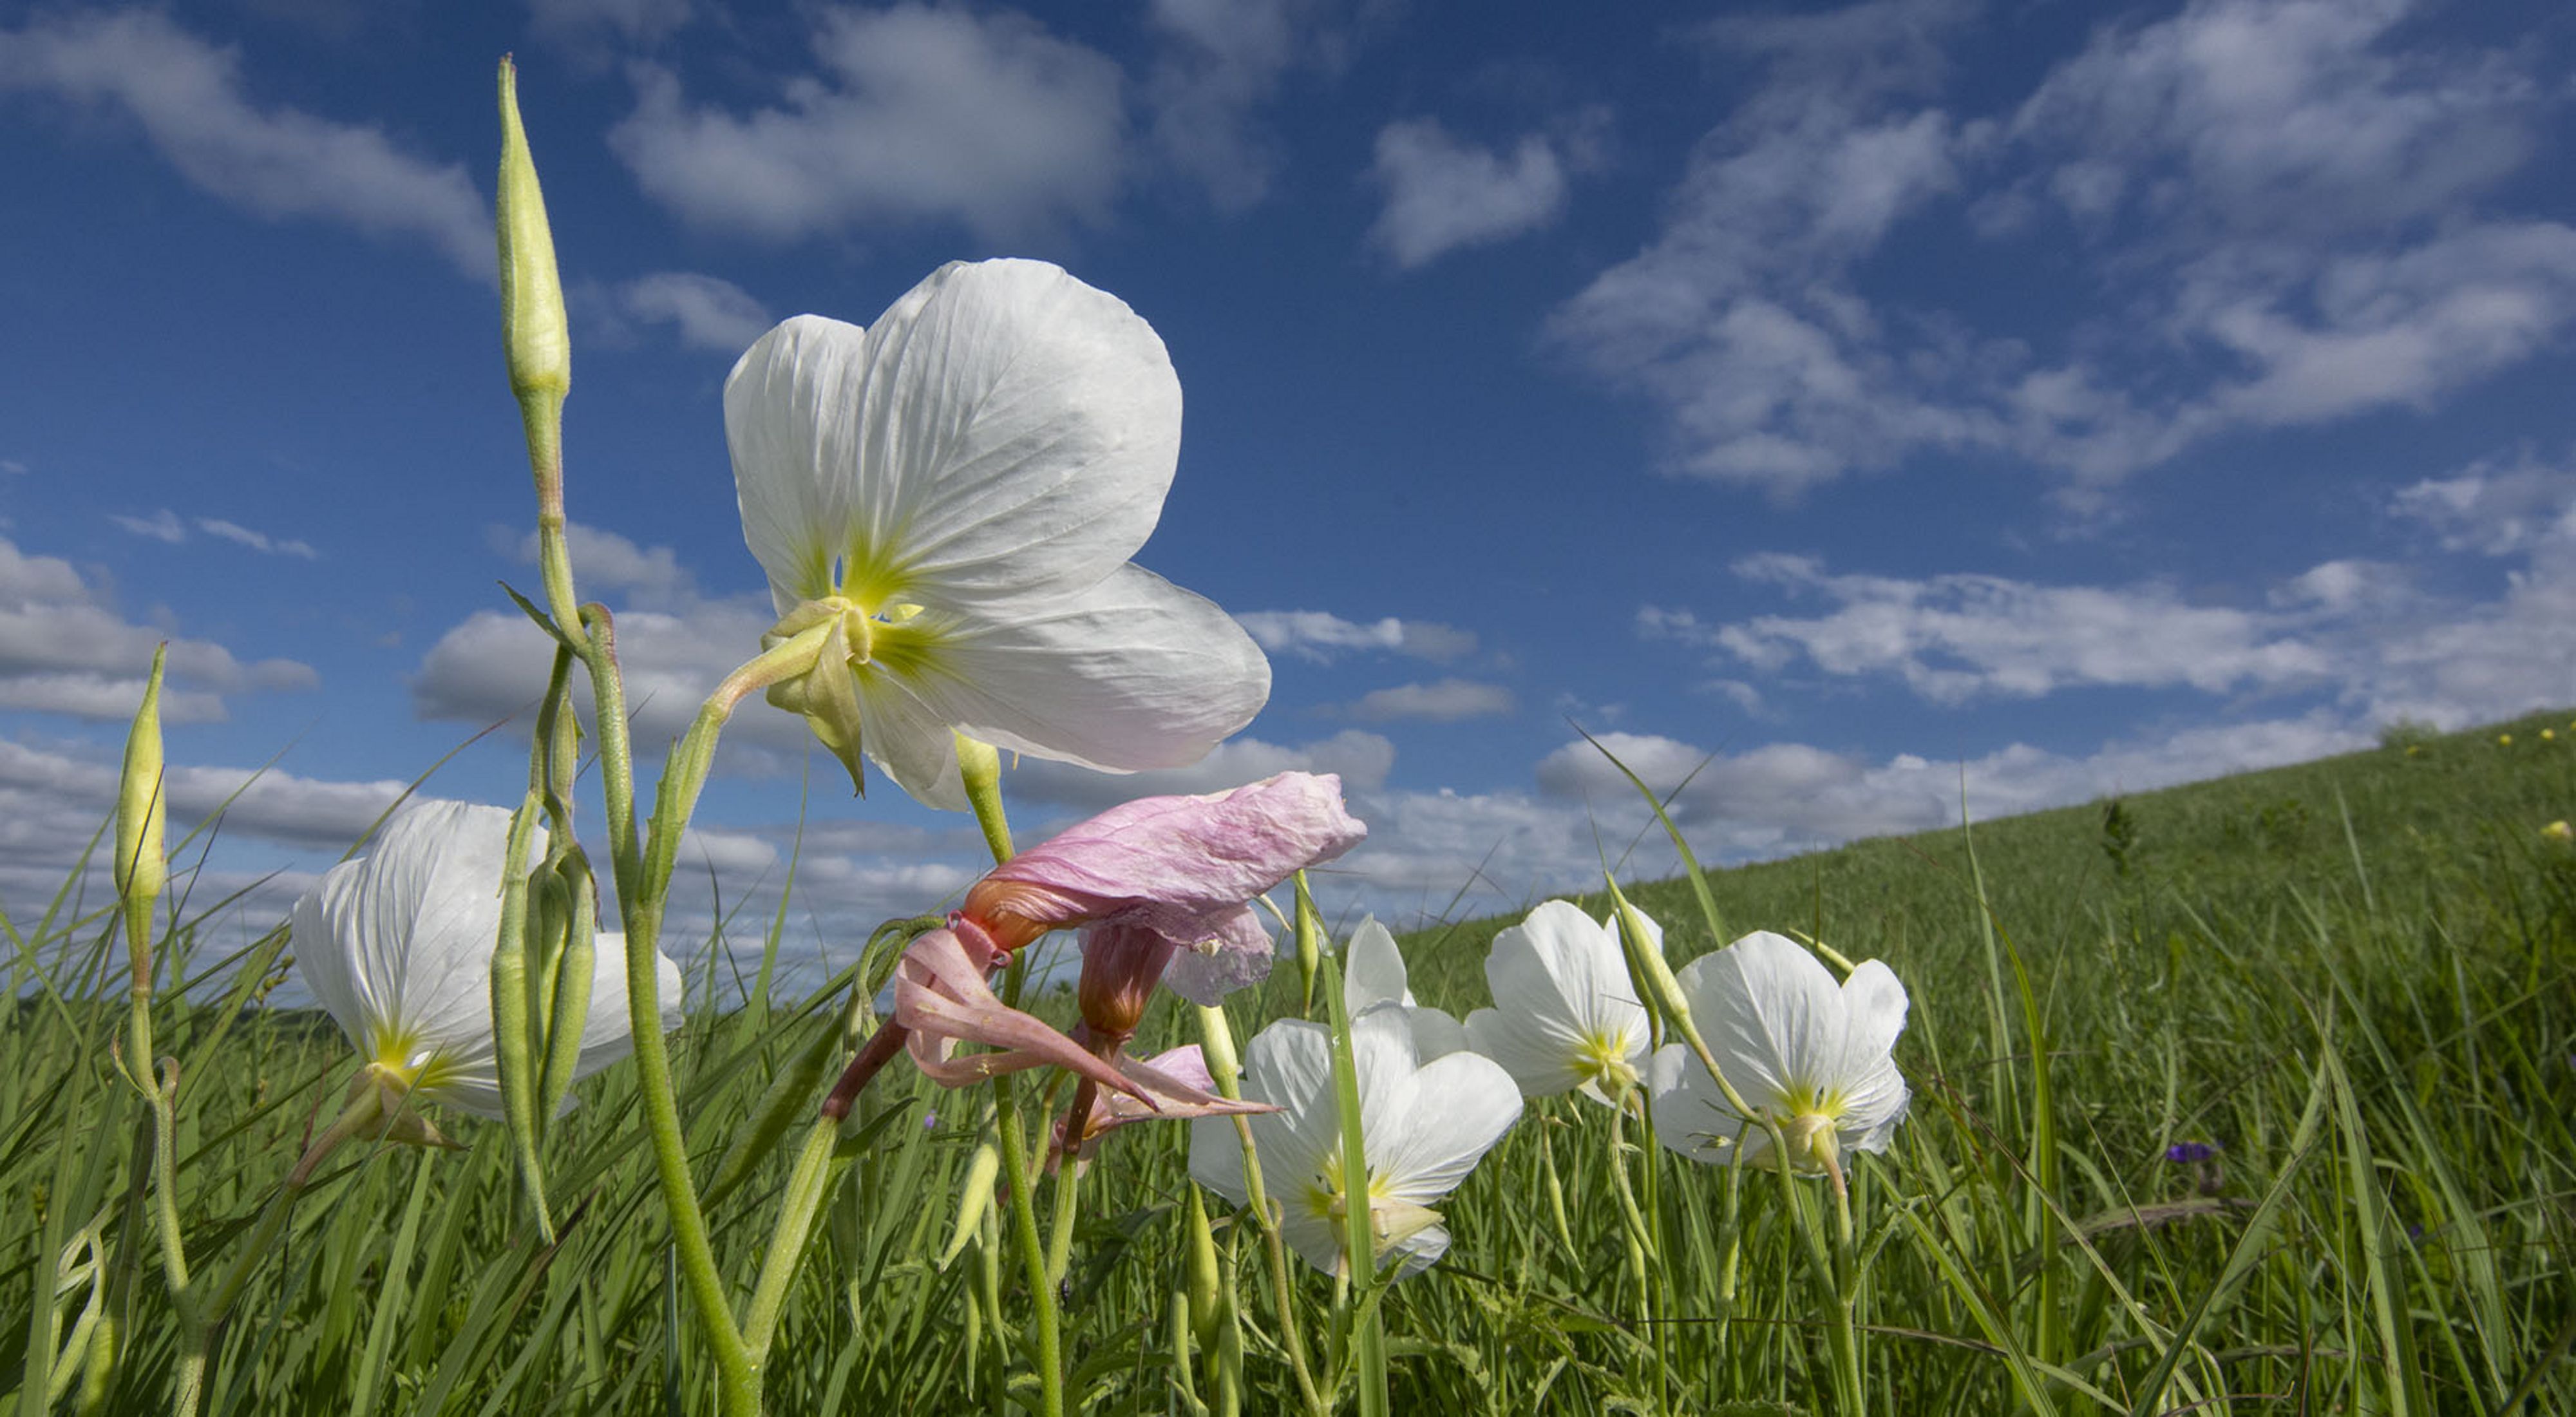 White flower sprouting out of green grass. White clouds are scattered in the bright blue sky.